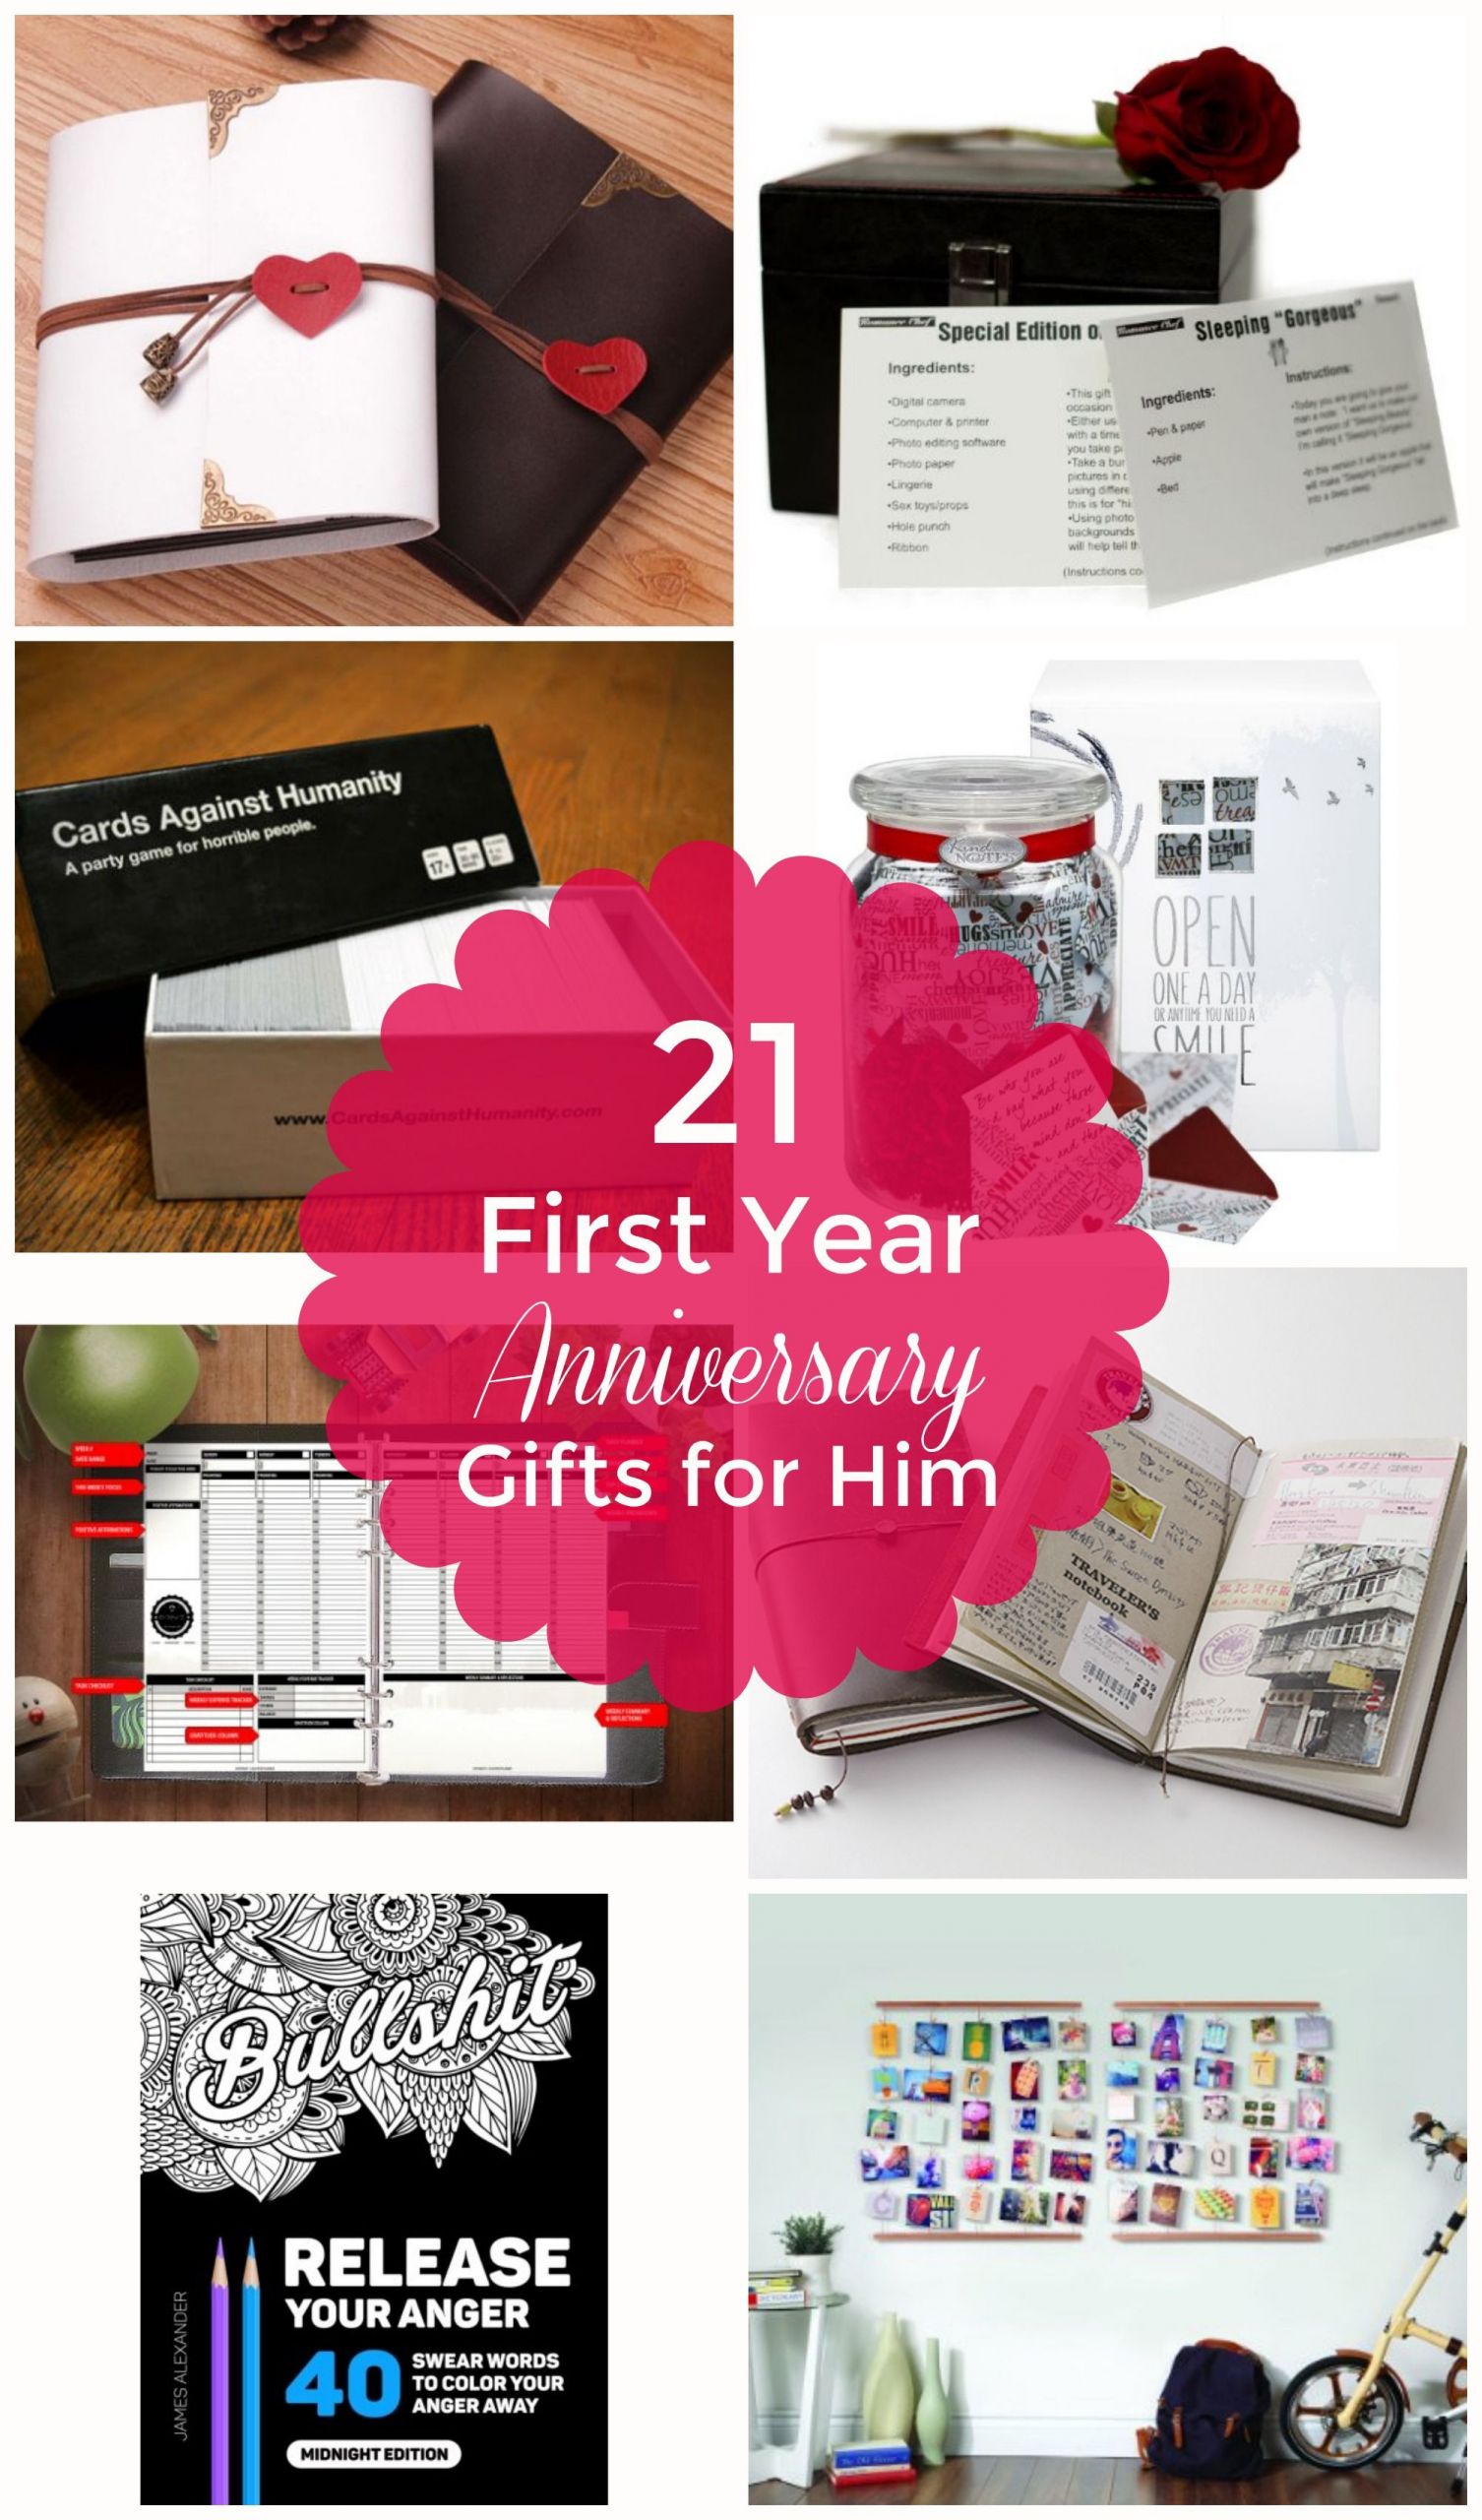 1St Year Anniversary Gift Ideas For Him
 The traditional first anniversary theme is paper which